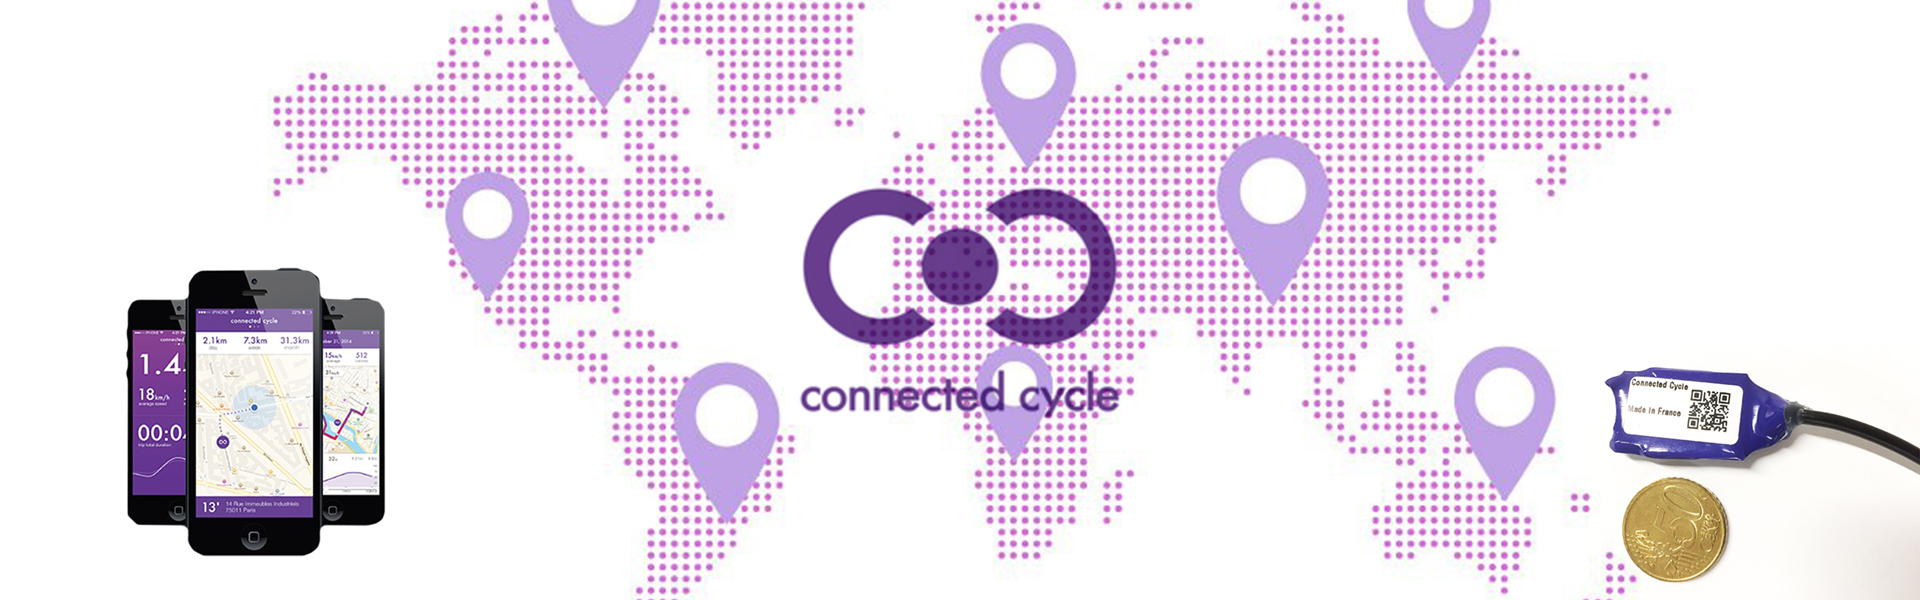 Projet connected cycle